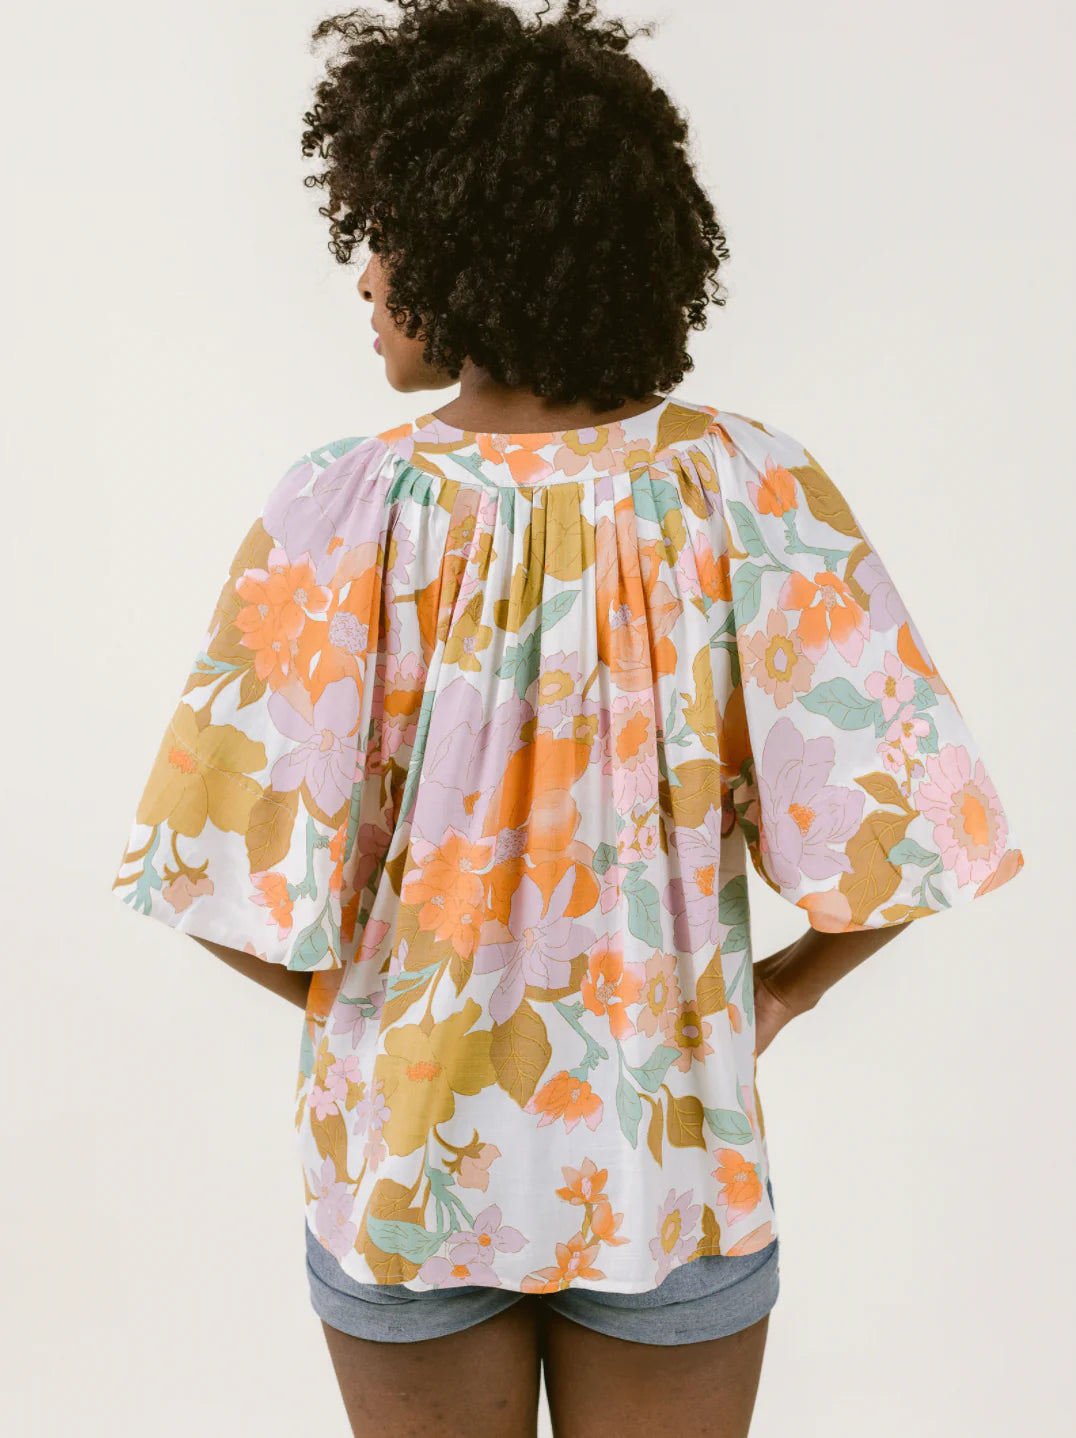 Polly Top in Seaside Floral - The French Shoppe